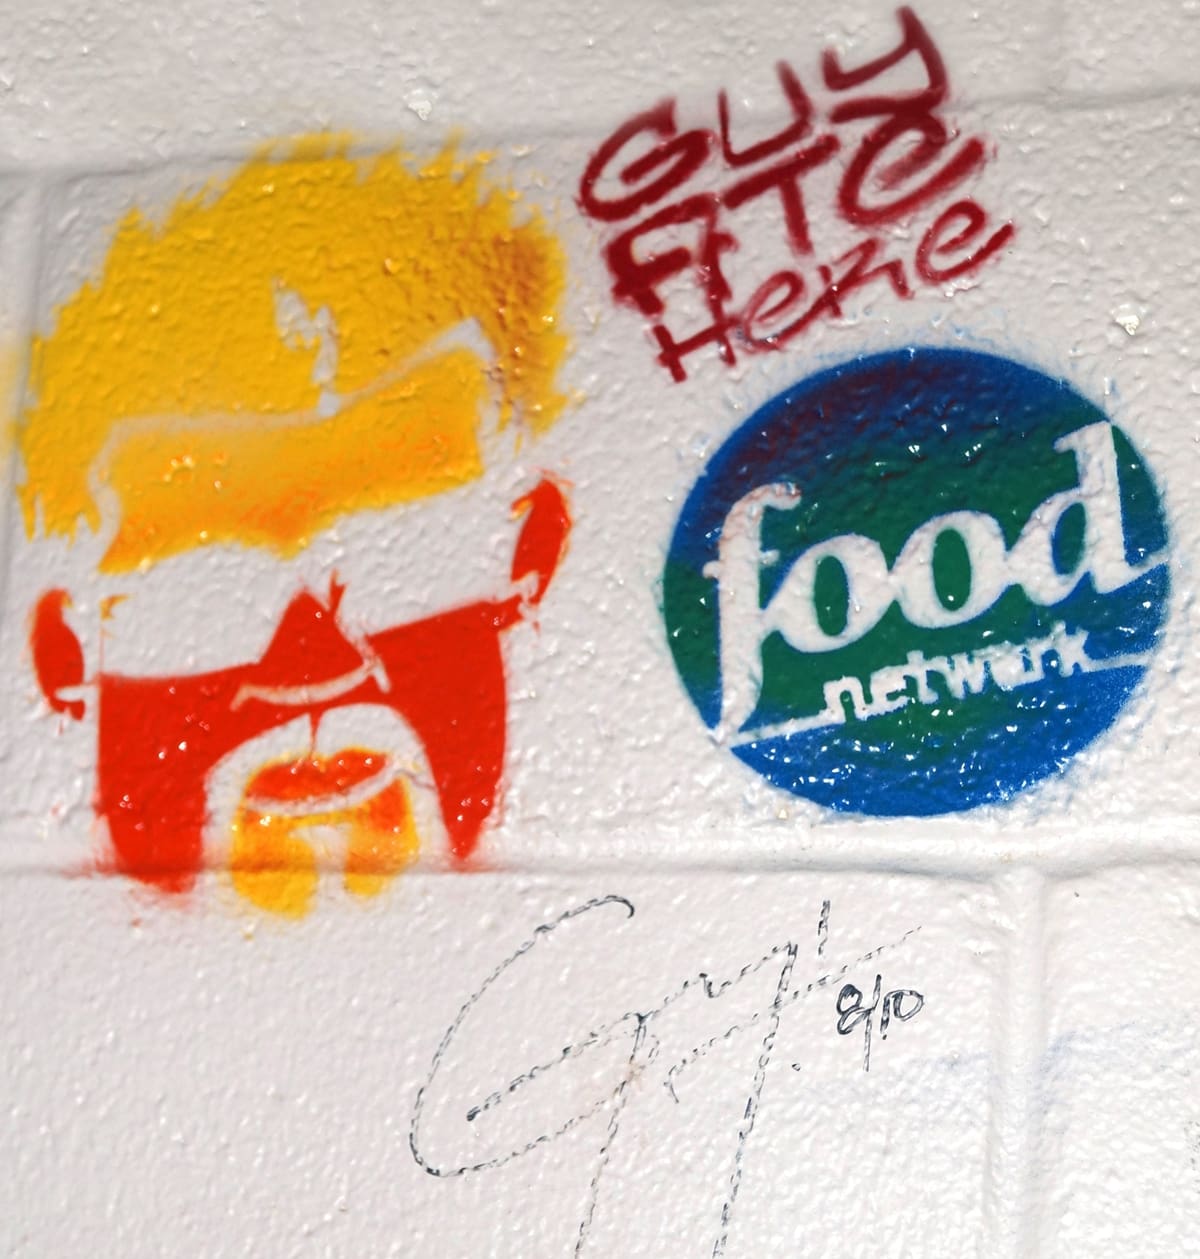 Celebrity chef Guy Fieri signed the wall at Quahog's Seafood Shack and Bar in Stone Harbor, NJ, after the restaurant was featured on the Food Network show Diners Drive-Ins and Dives